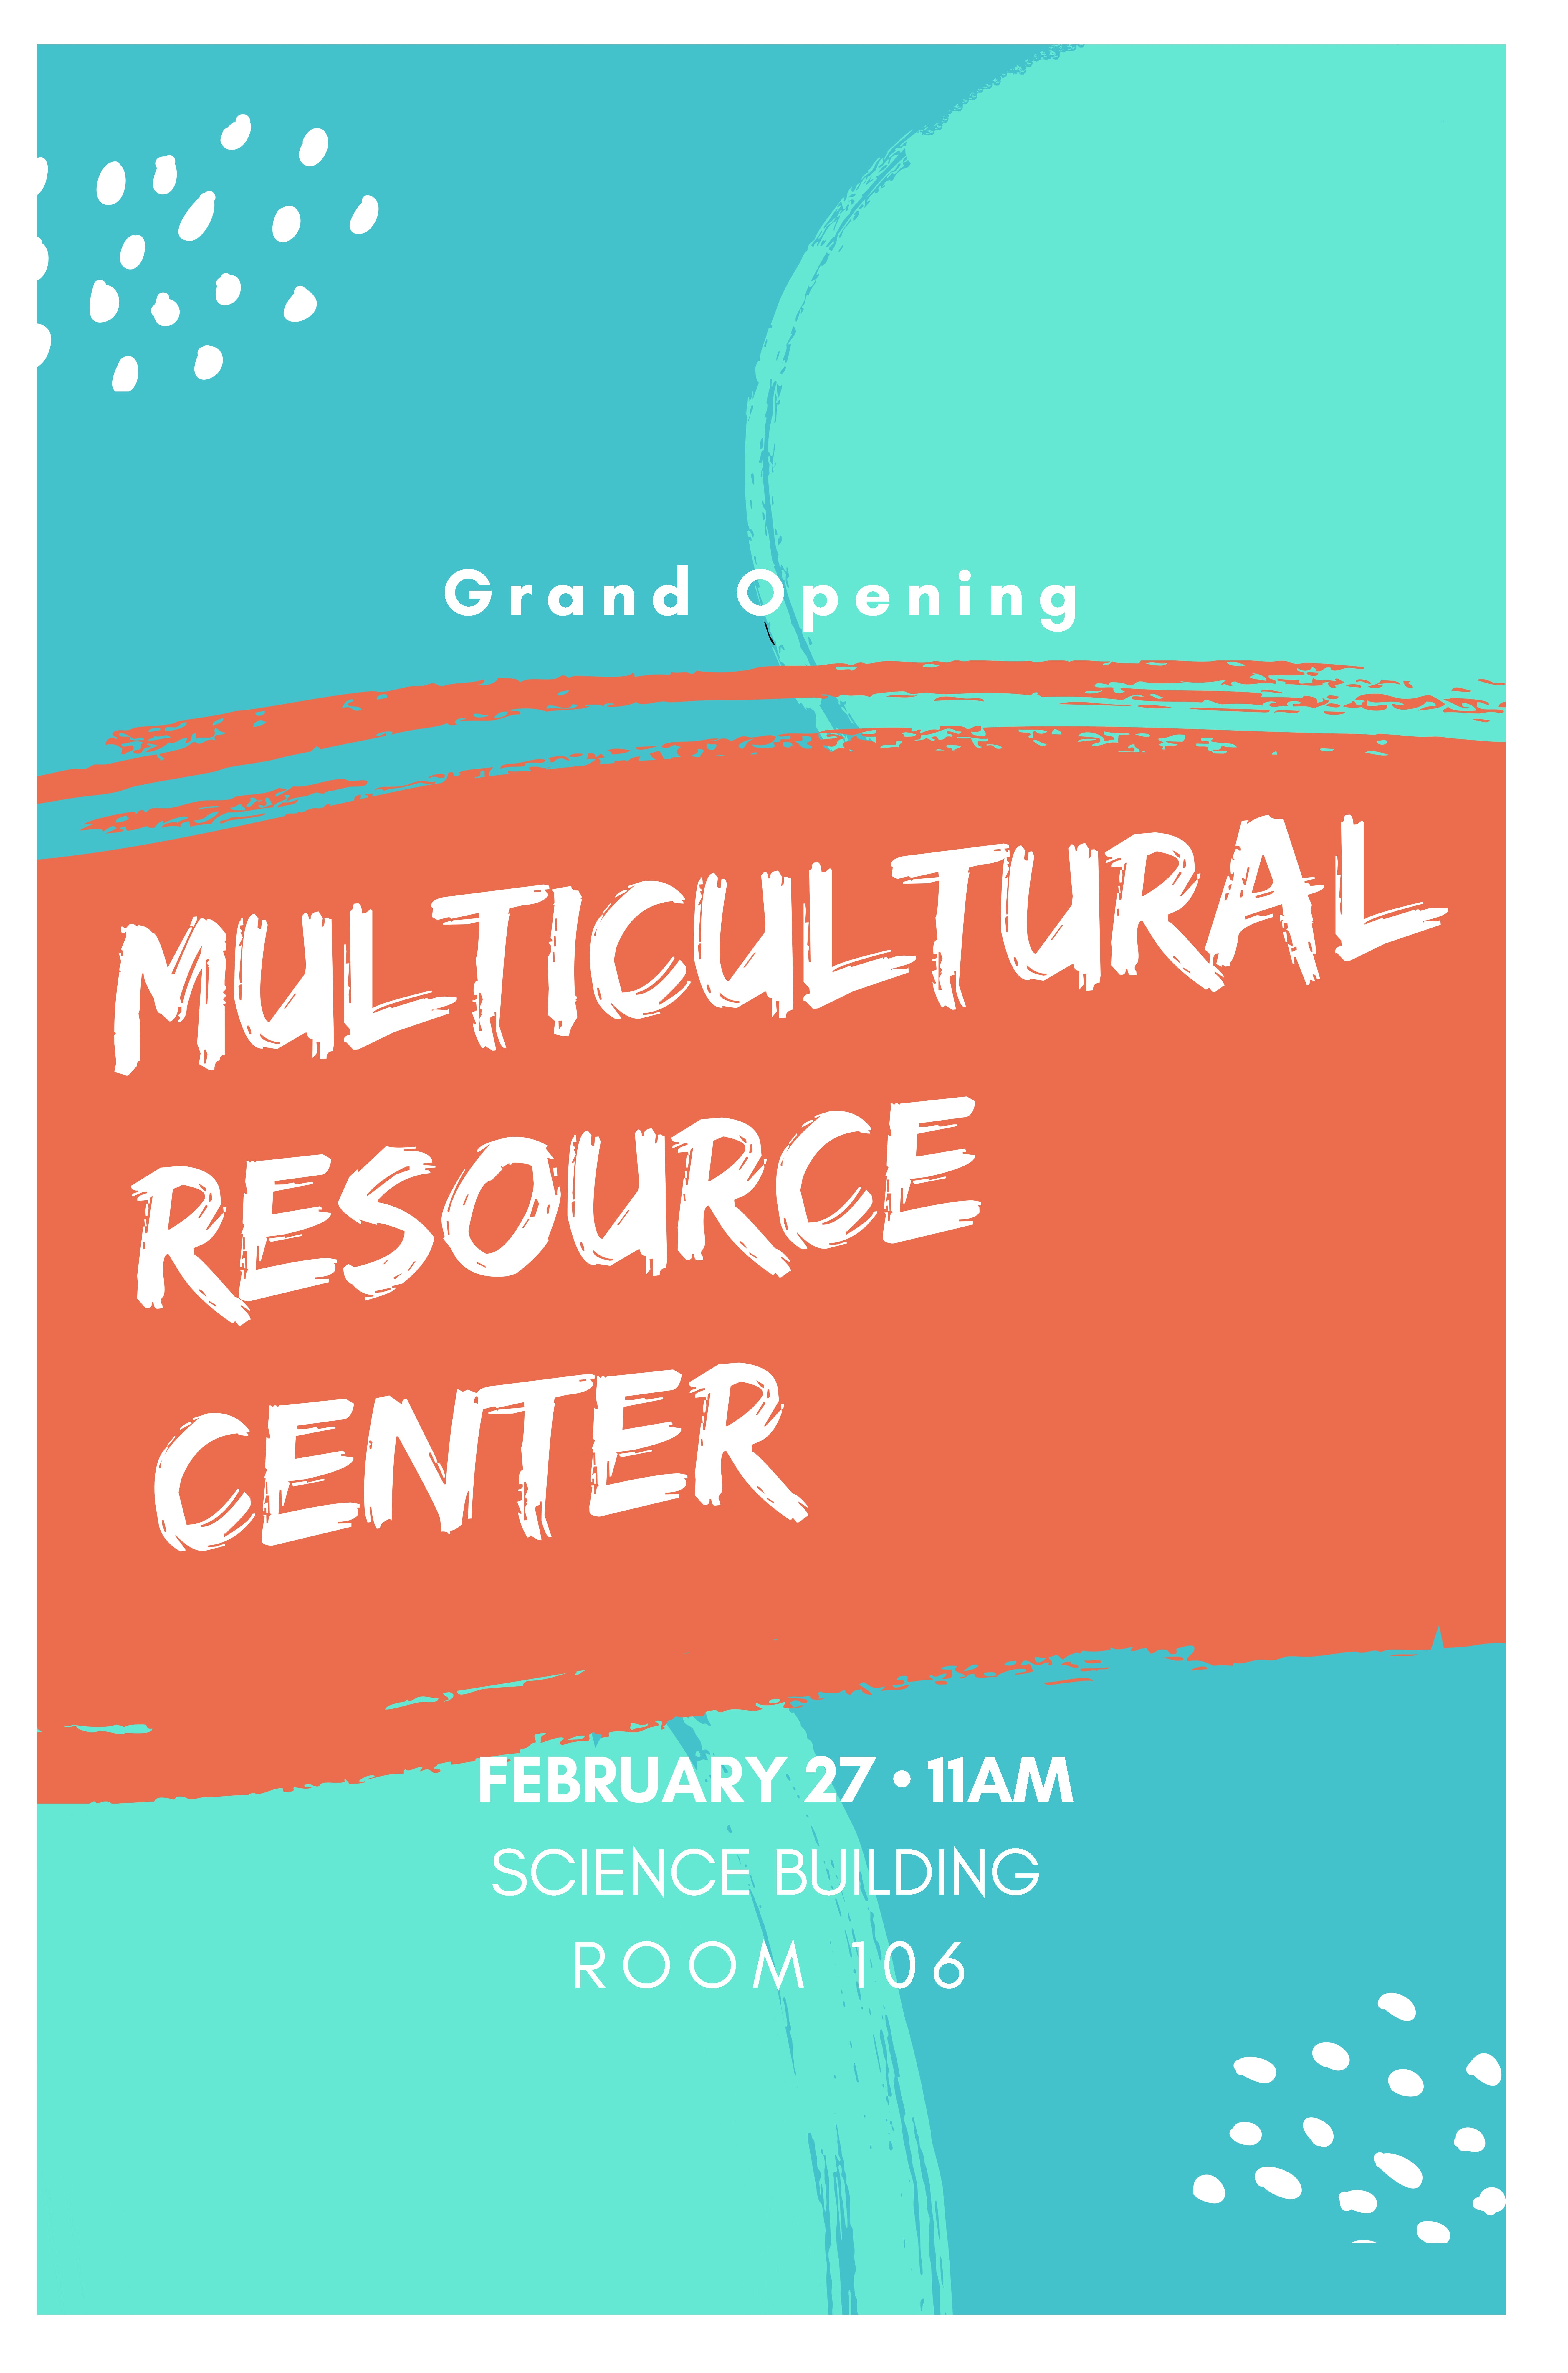 Grand Opening of the Multicultural Resource Center on Feb. 27